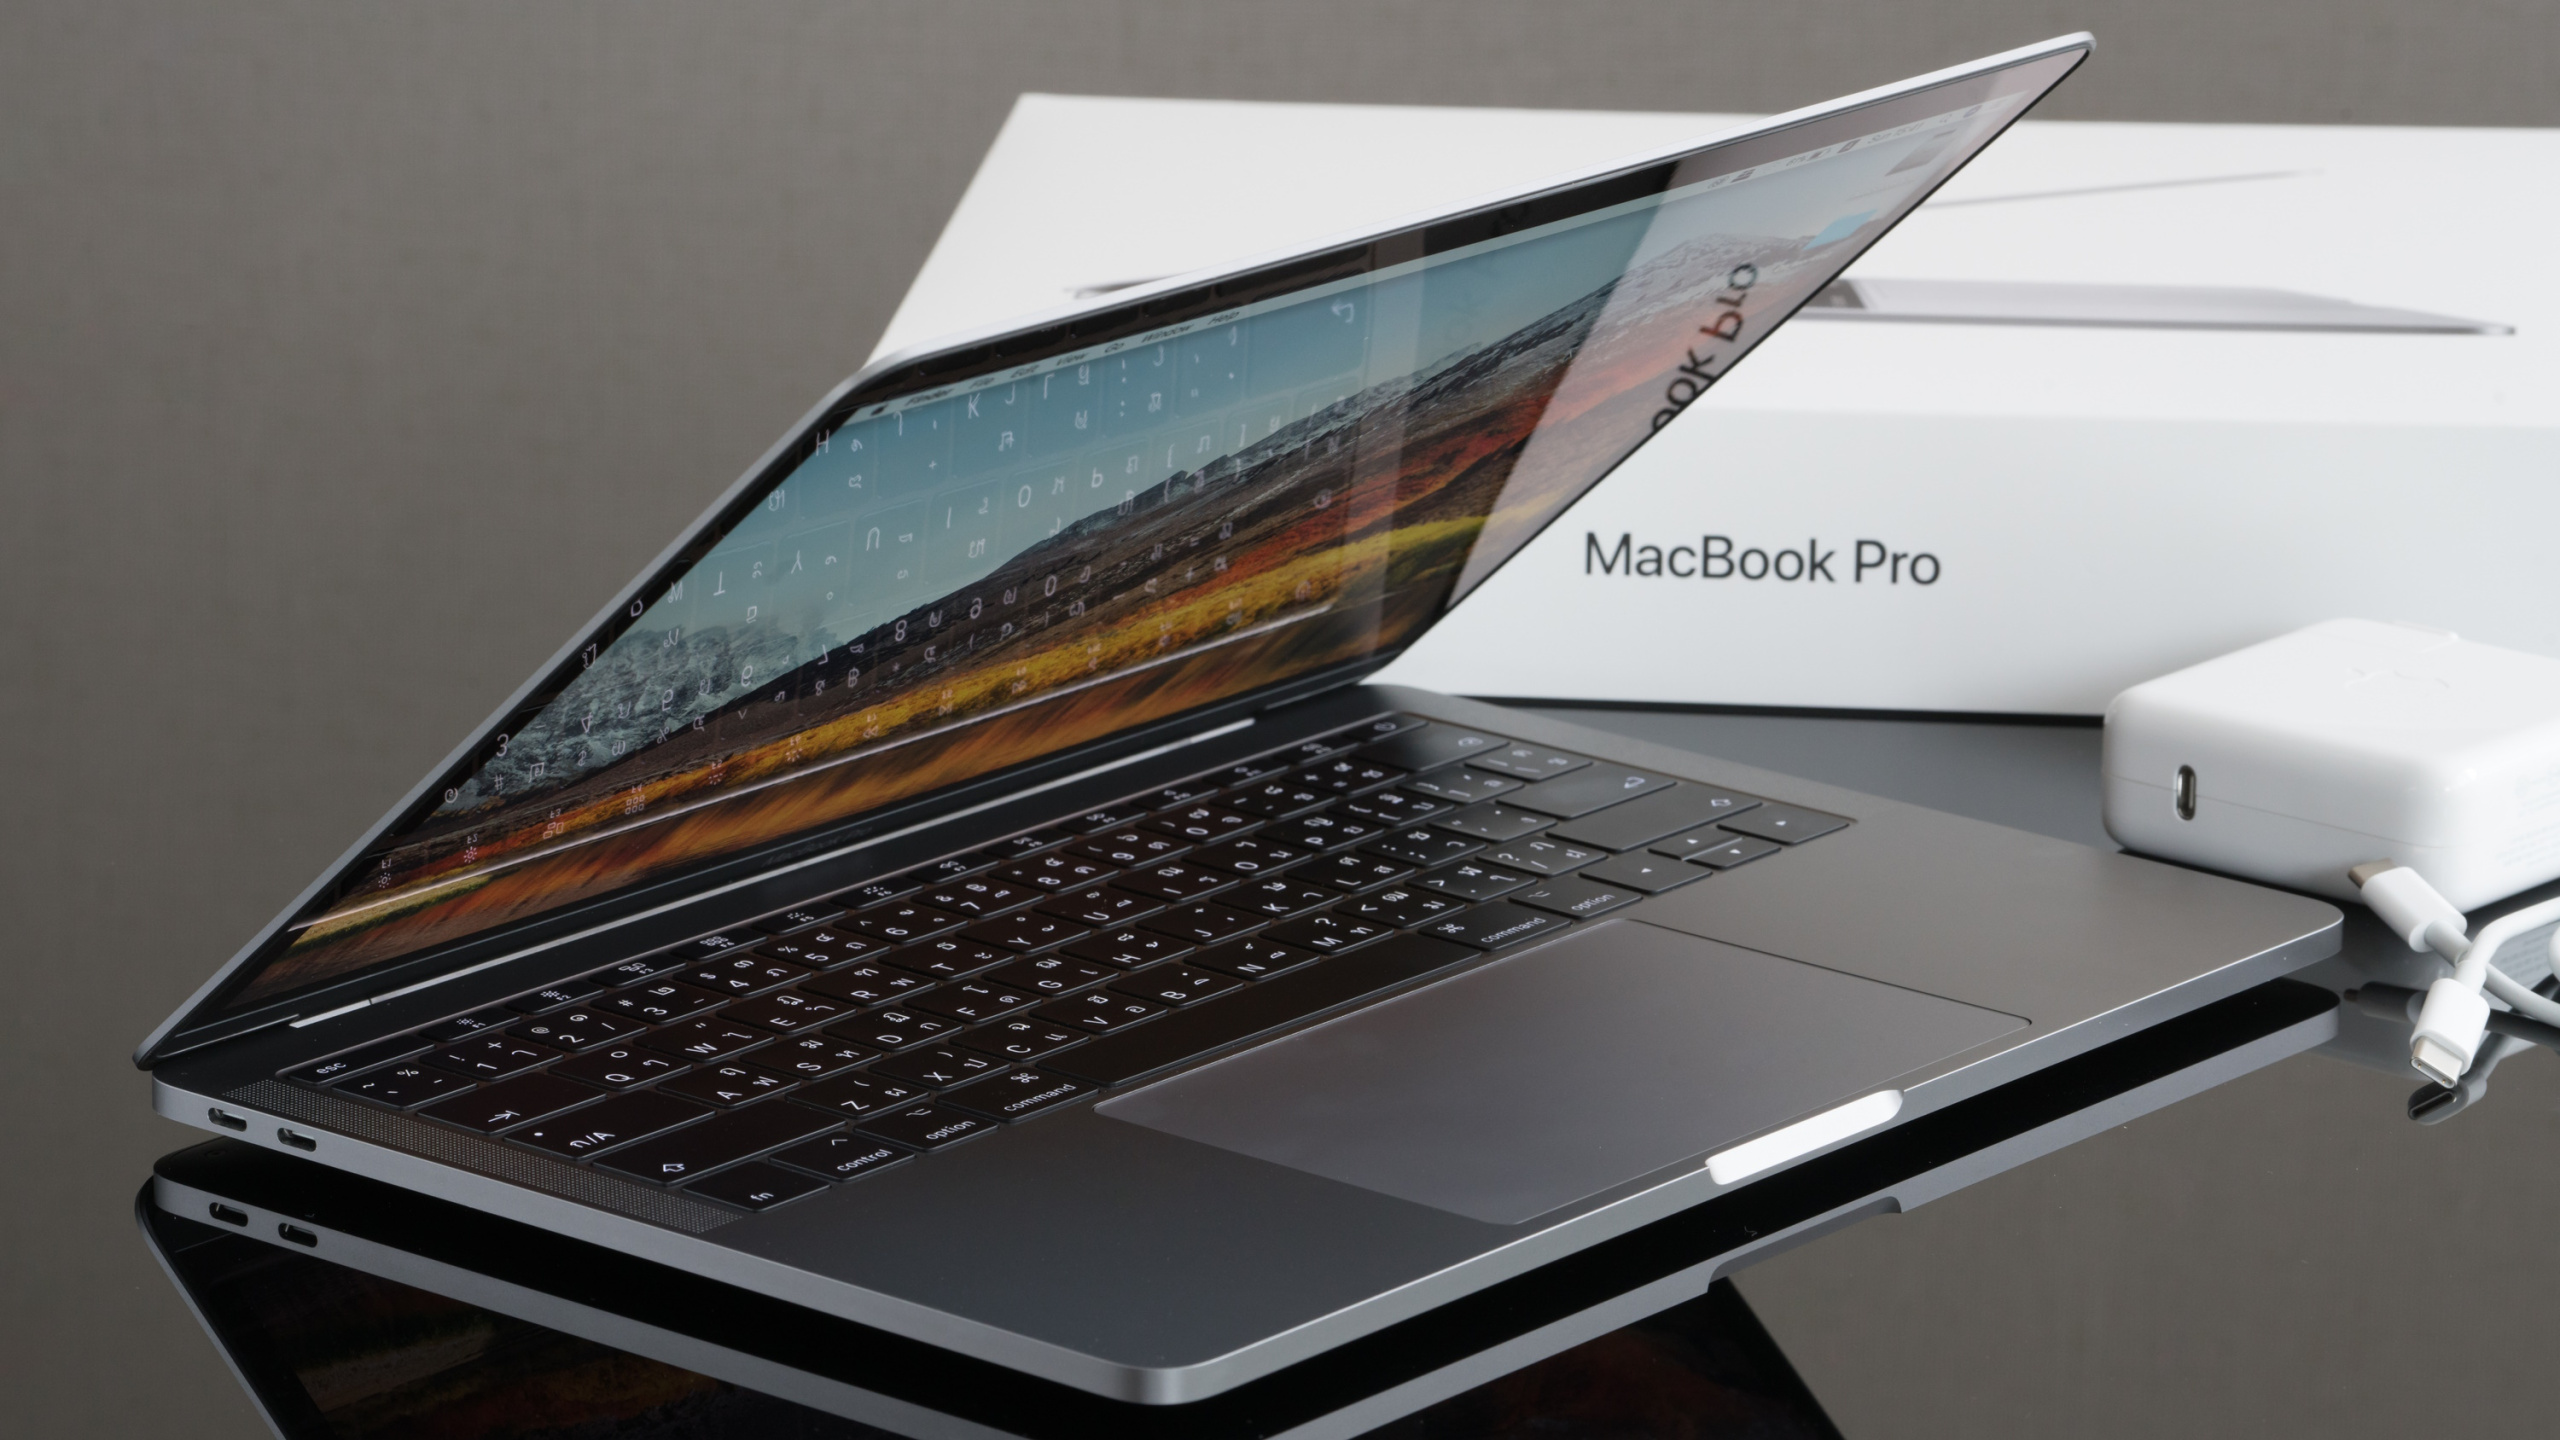 We won’t see an Apple MacBook Pro with an OLED screen for a few more years